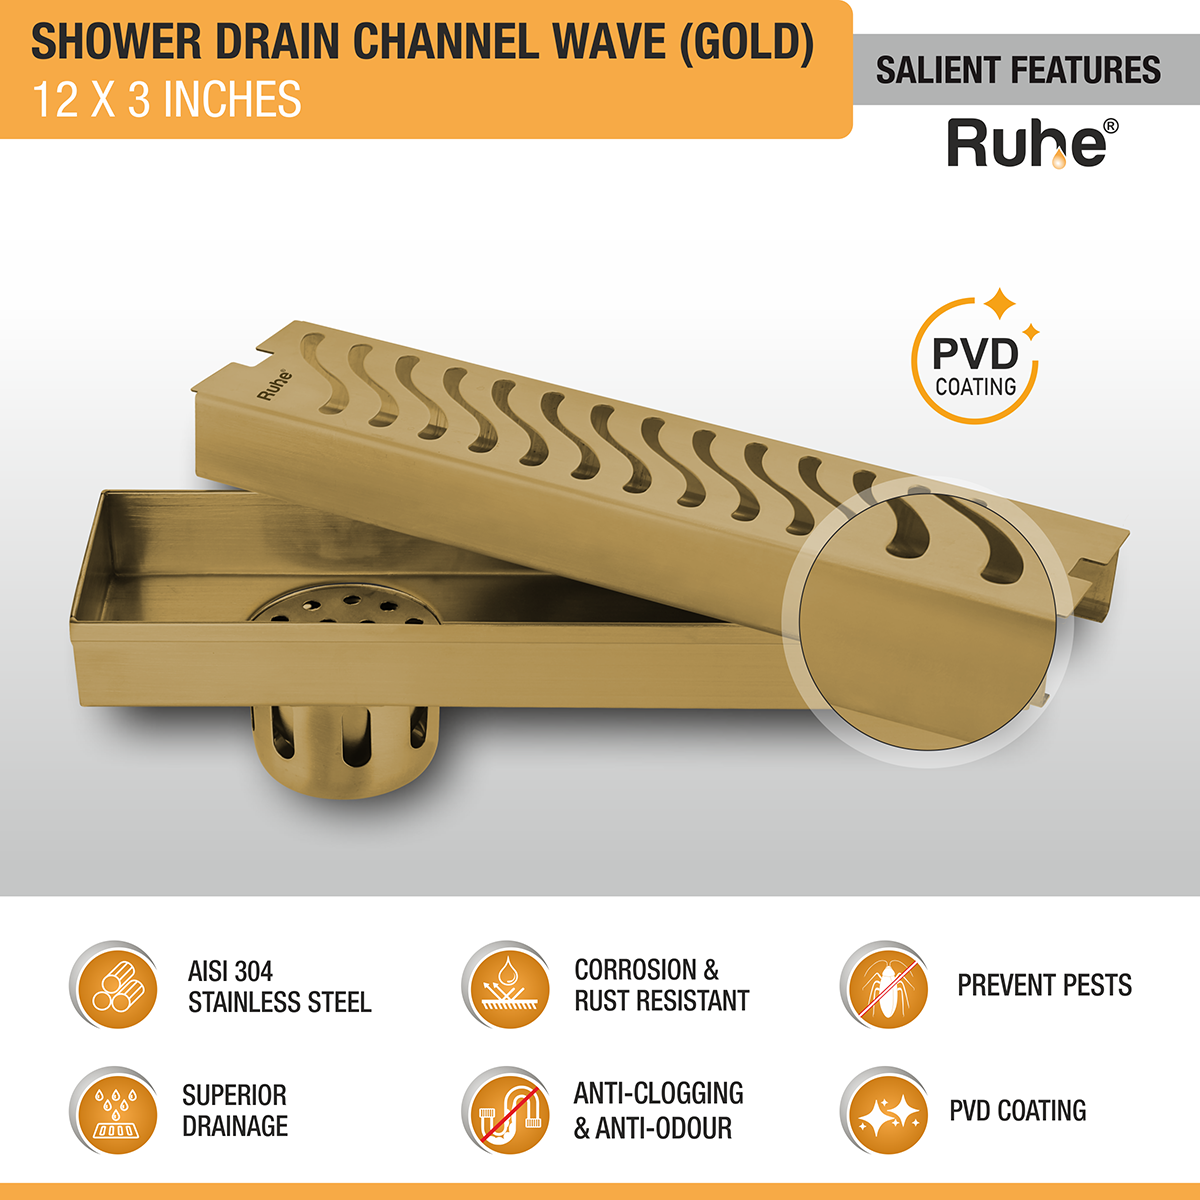 Wave Shower Drain Channel (12 x 3 Inches) YELLOW GOLD features